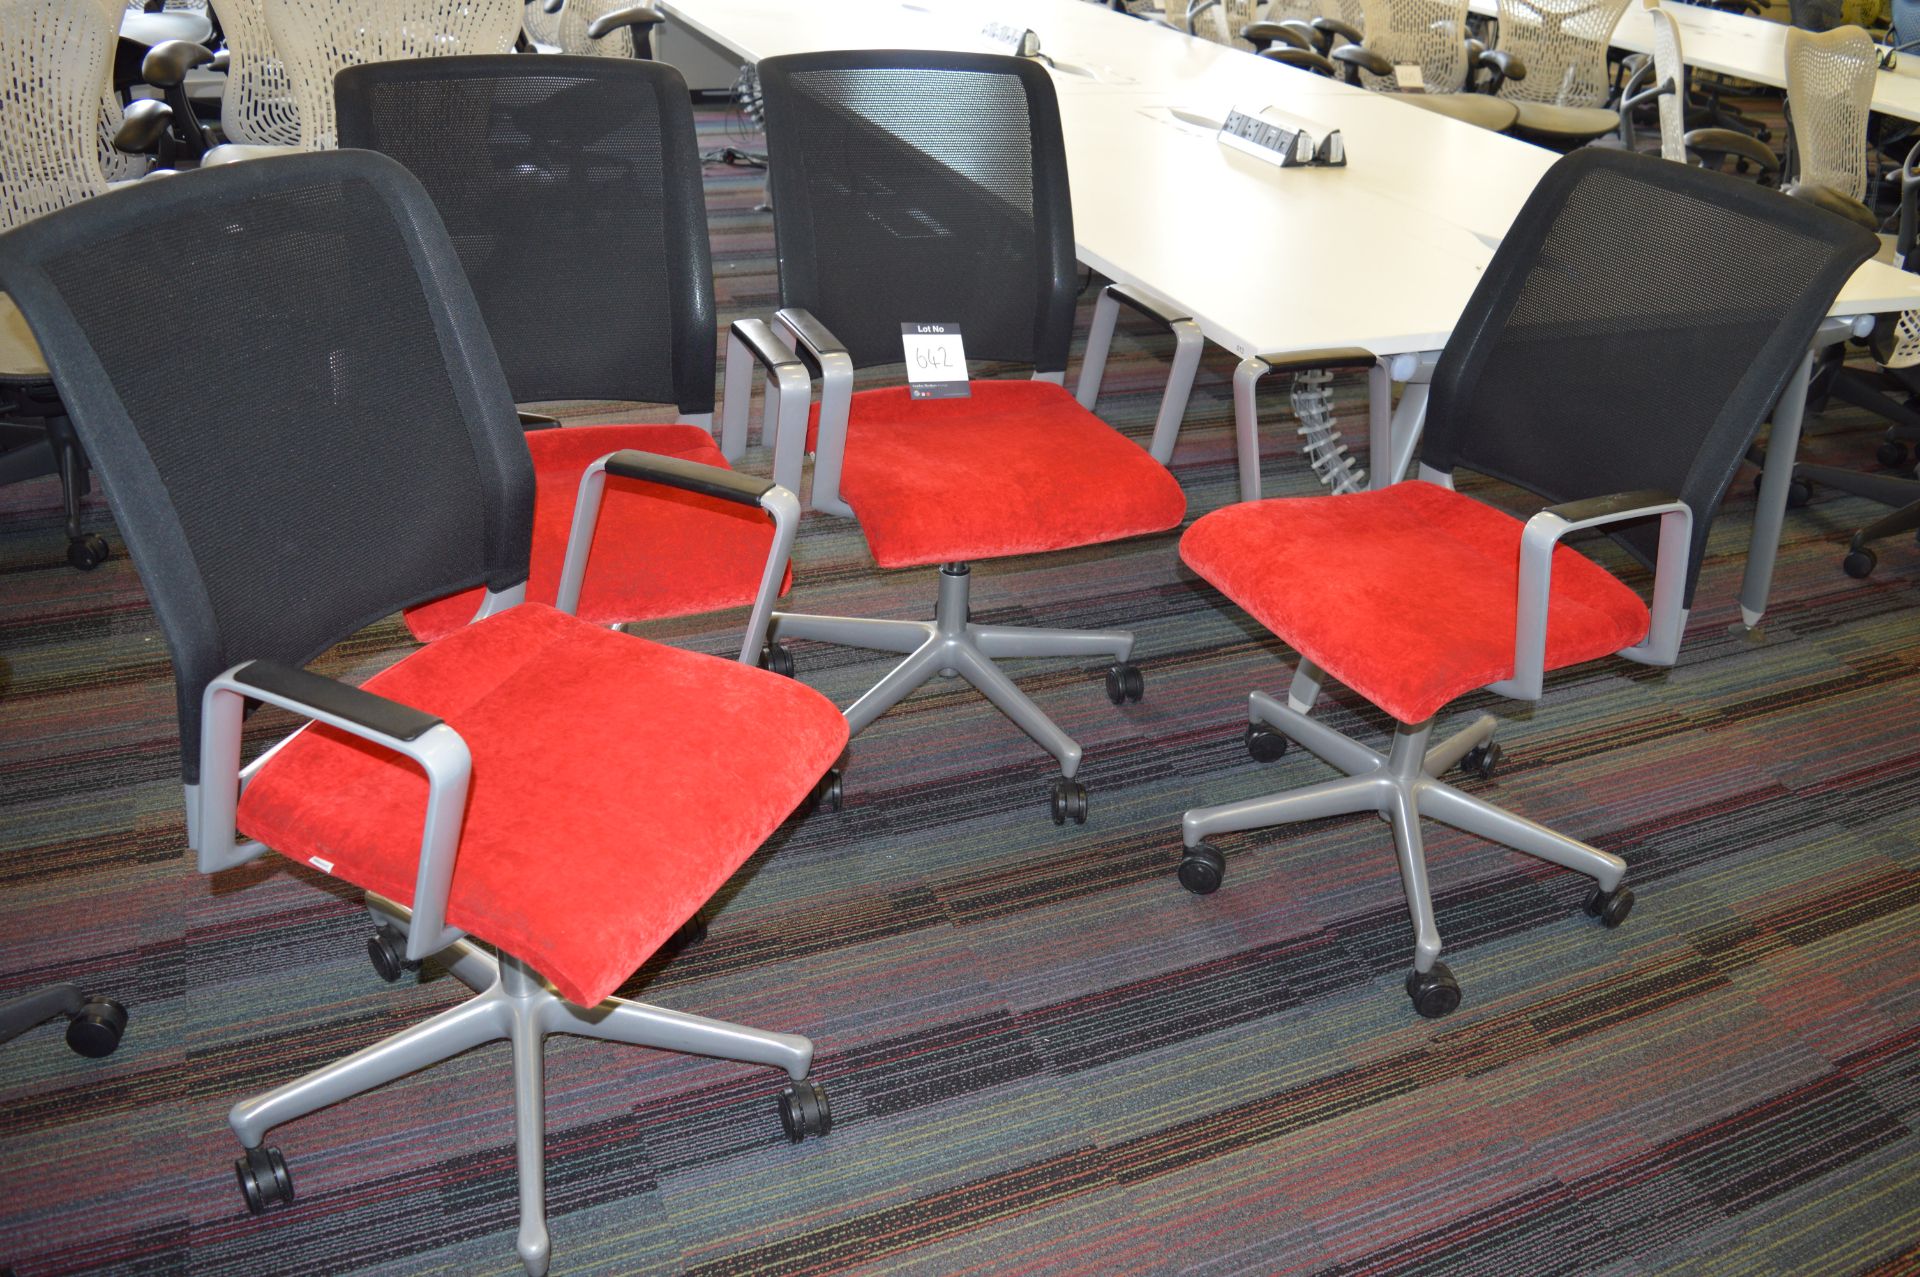 4 x Interstuhl, red upholstered seat, swivel elbow chairs with black back support